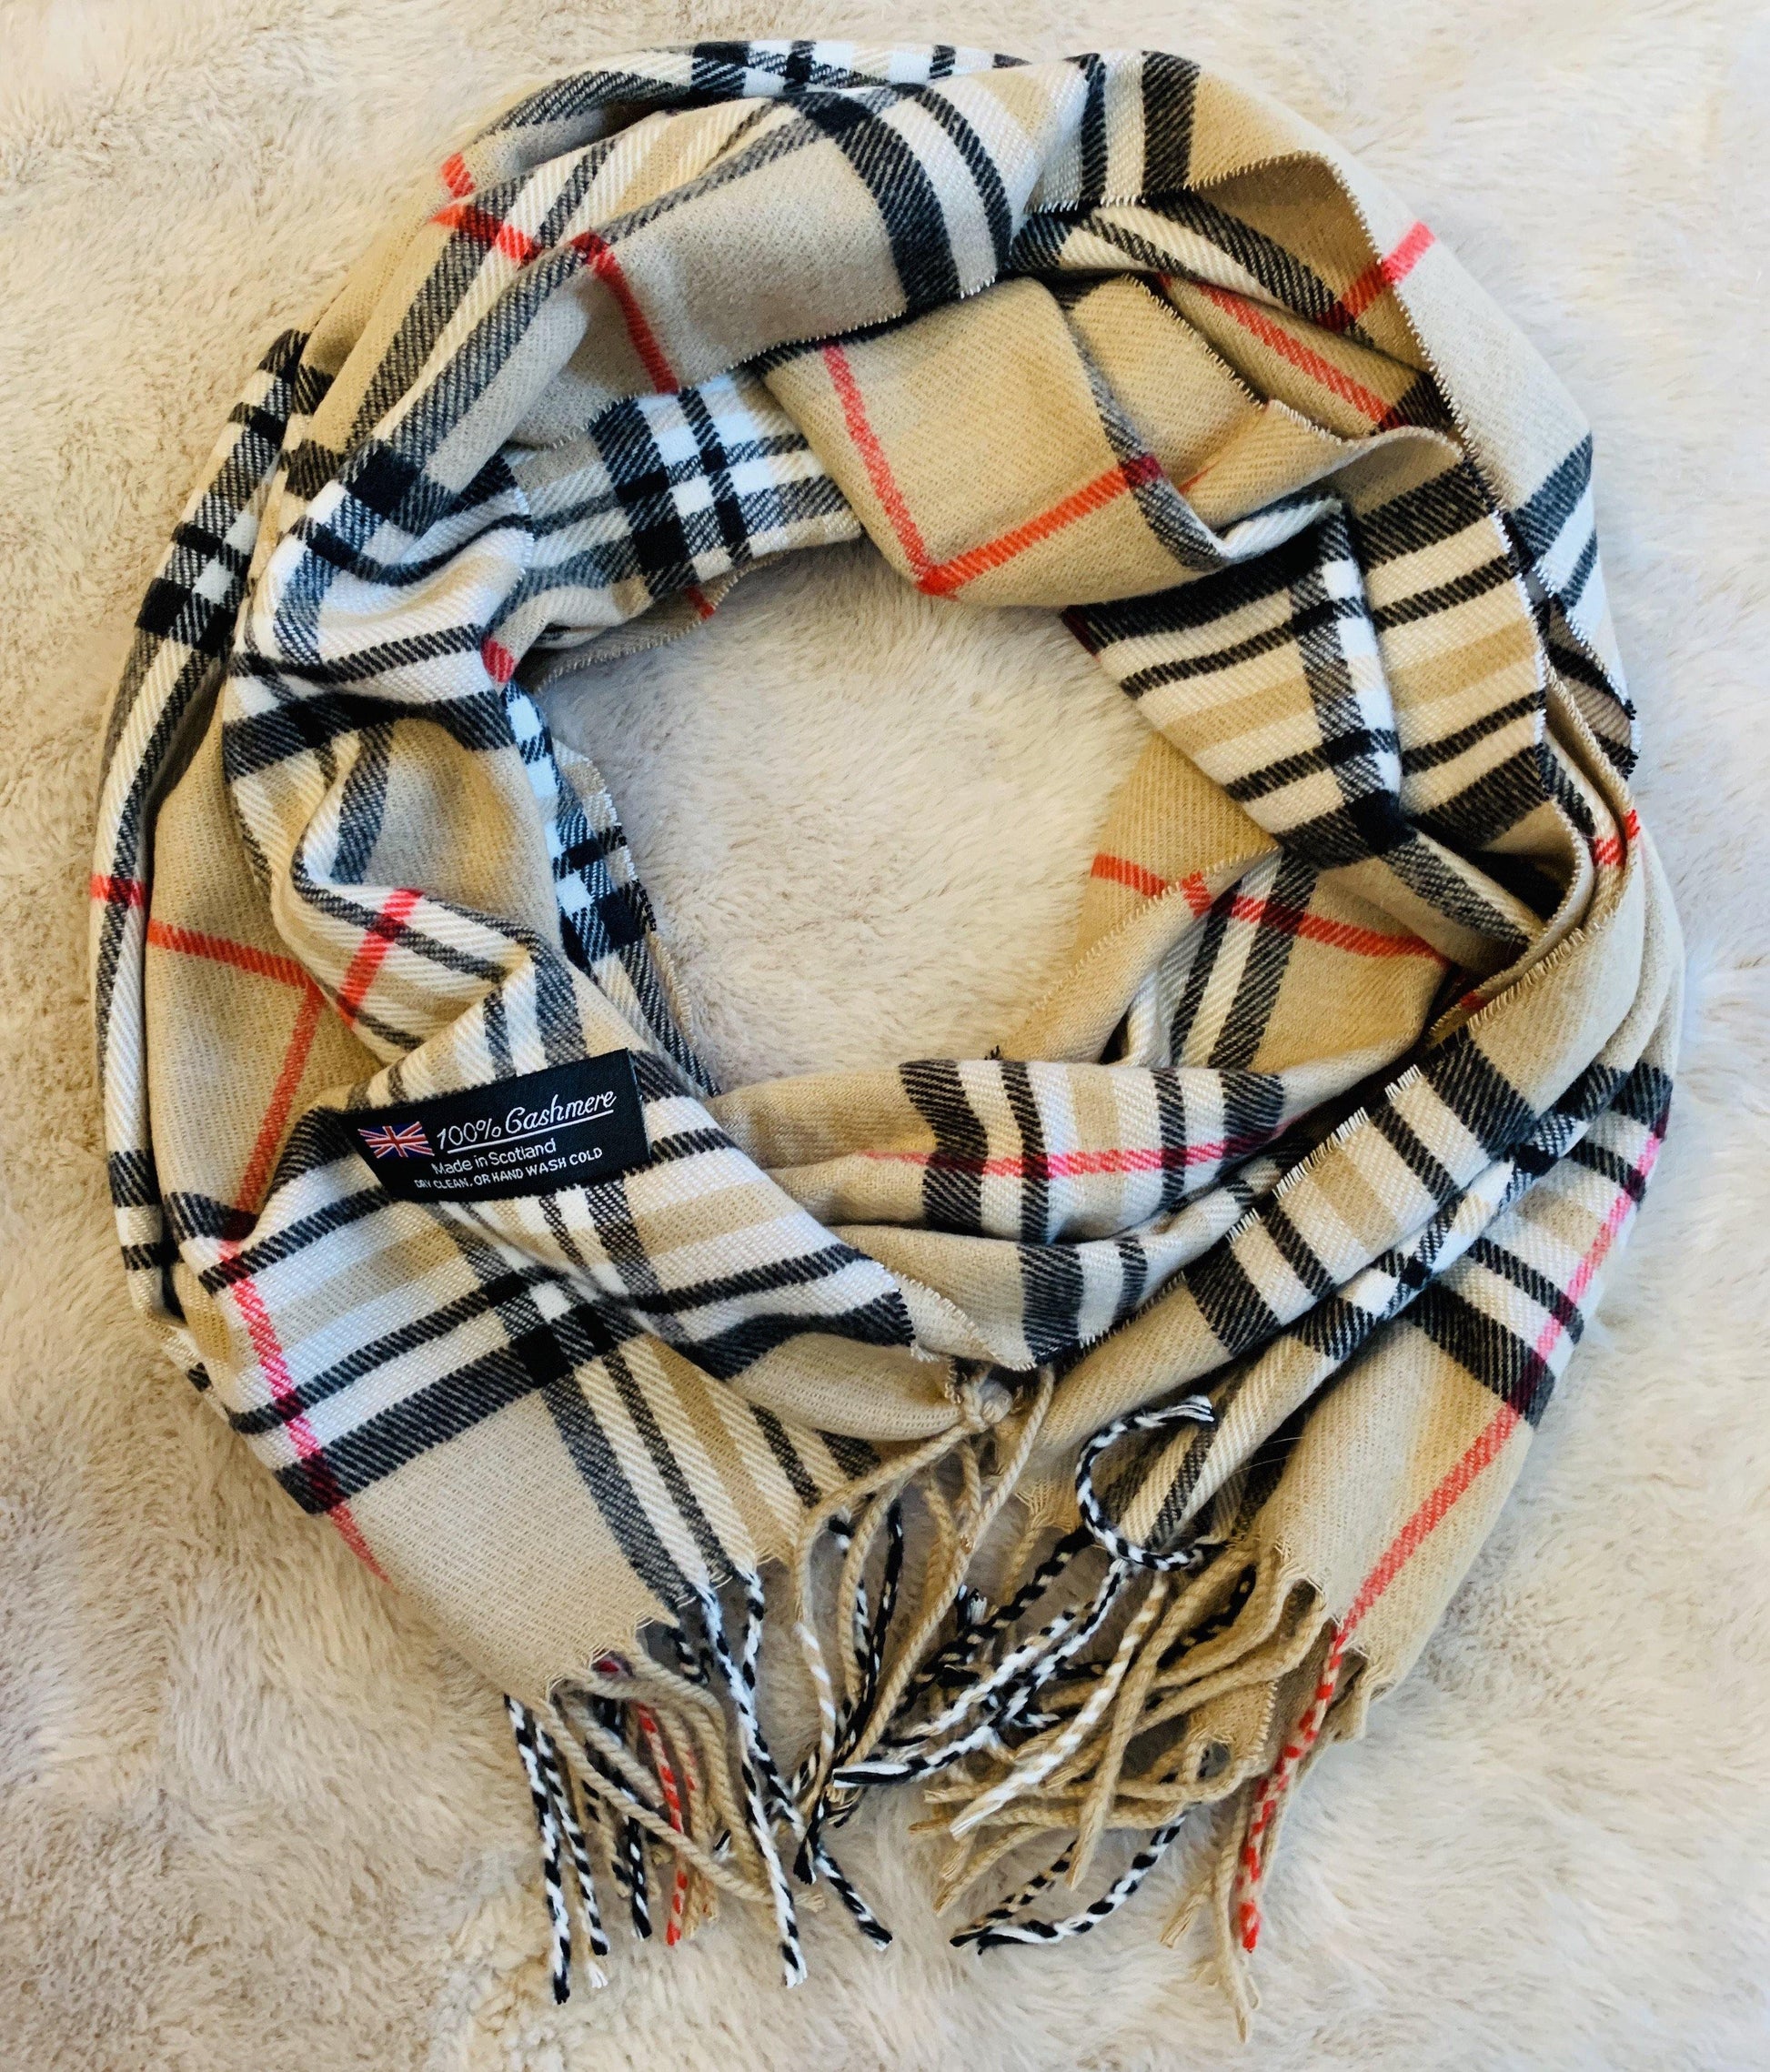 Scarf Camel vintage check designer inspired plaid Brown Red White Black Unisex - Stacy's Pink Martini Boutique